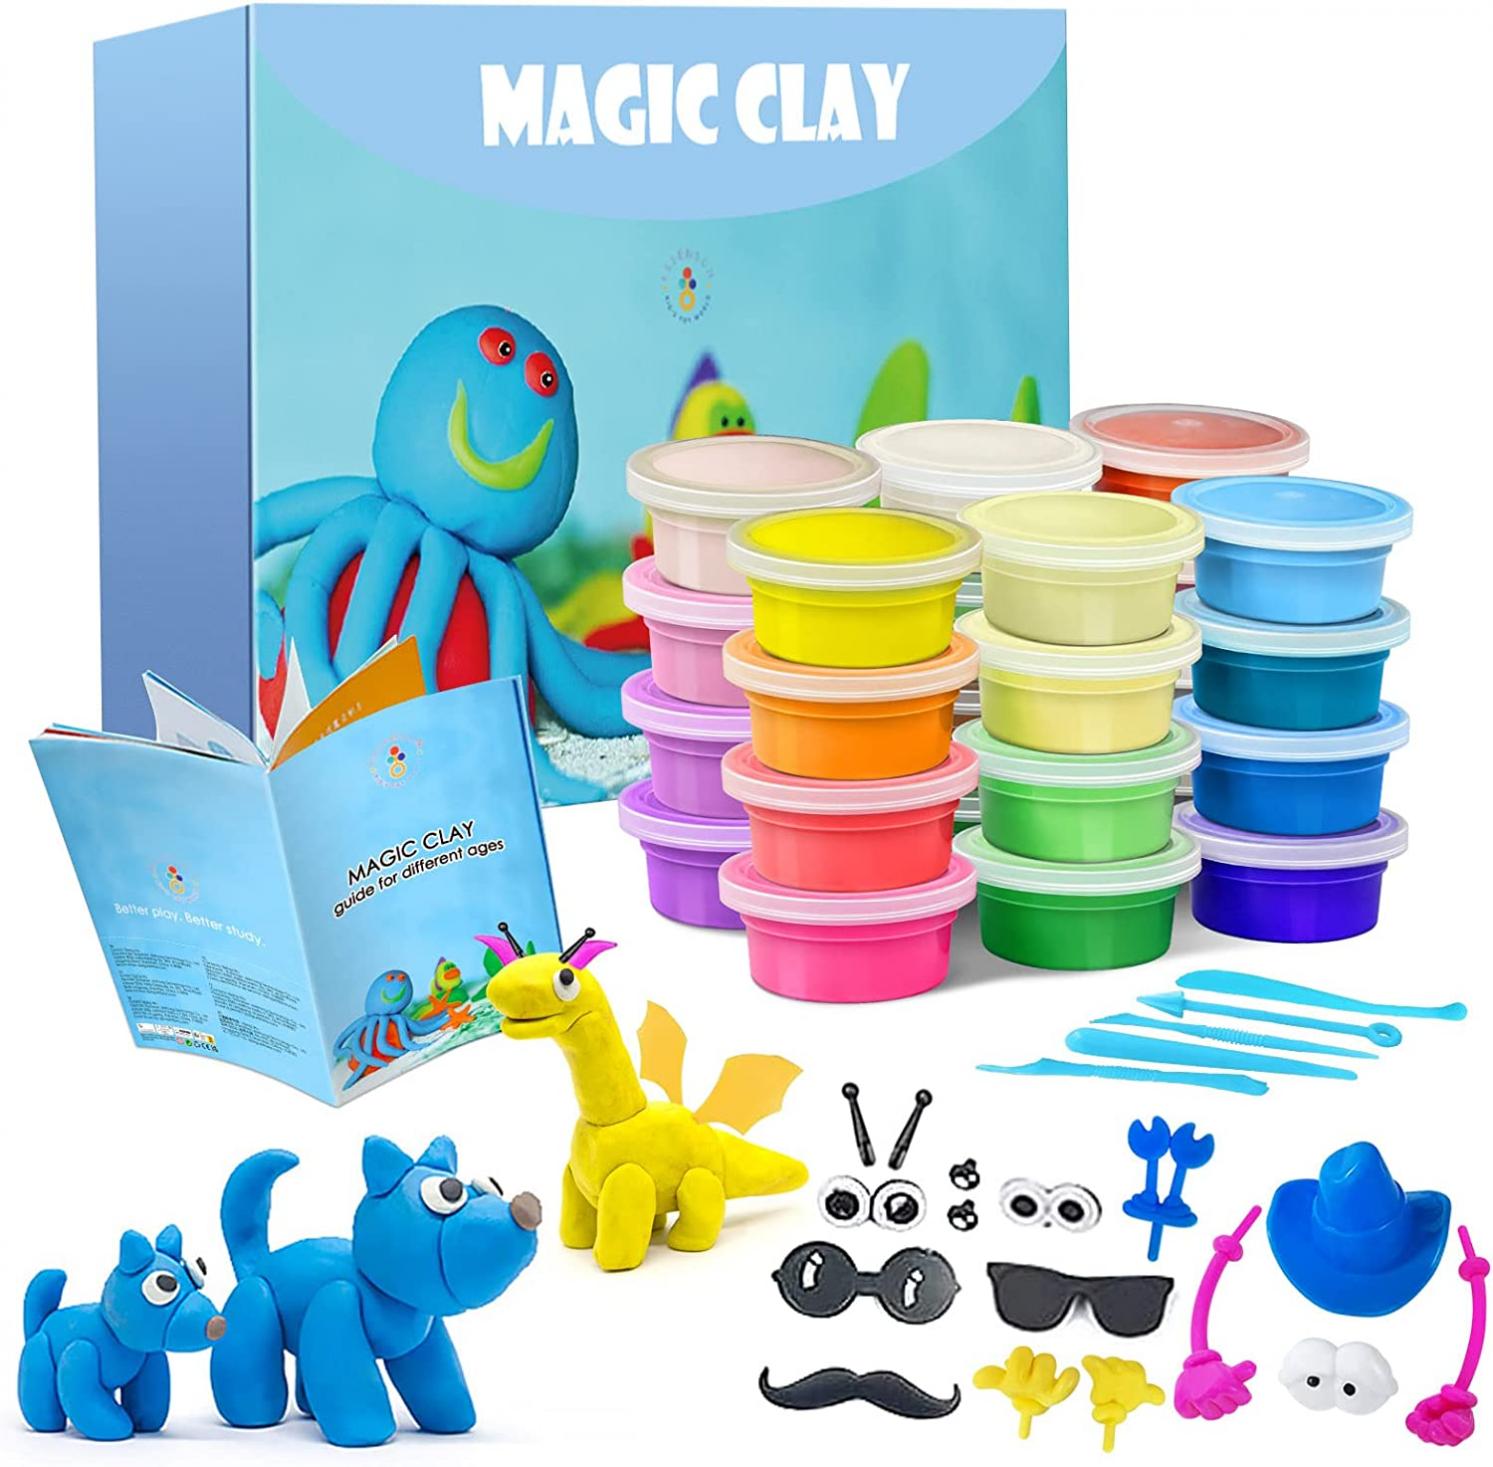 Modeling Clay Kit - 24 Colors Air Dry Ultra Light Magic Clay, Soft & Stretchy DIY Molding Clay with Tools, Animal Accessories, Easy Storage Box Kids Art Crafts Gift for Boys & Girls Age 3-12 year olds